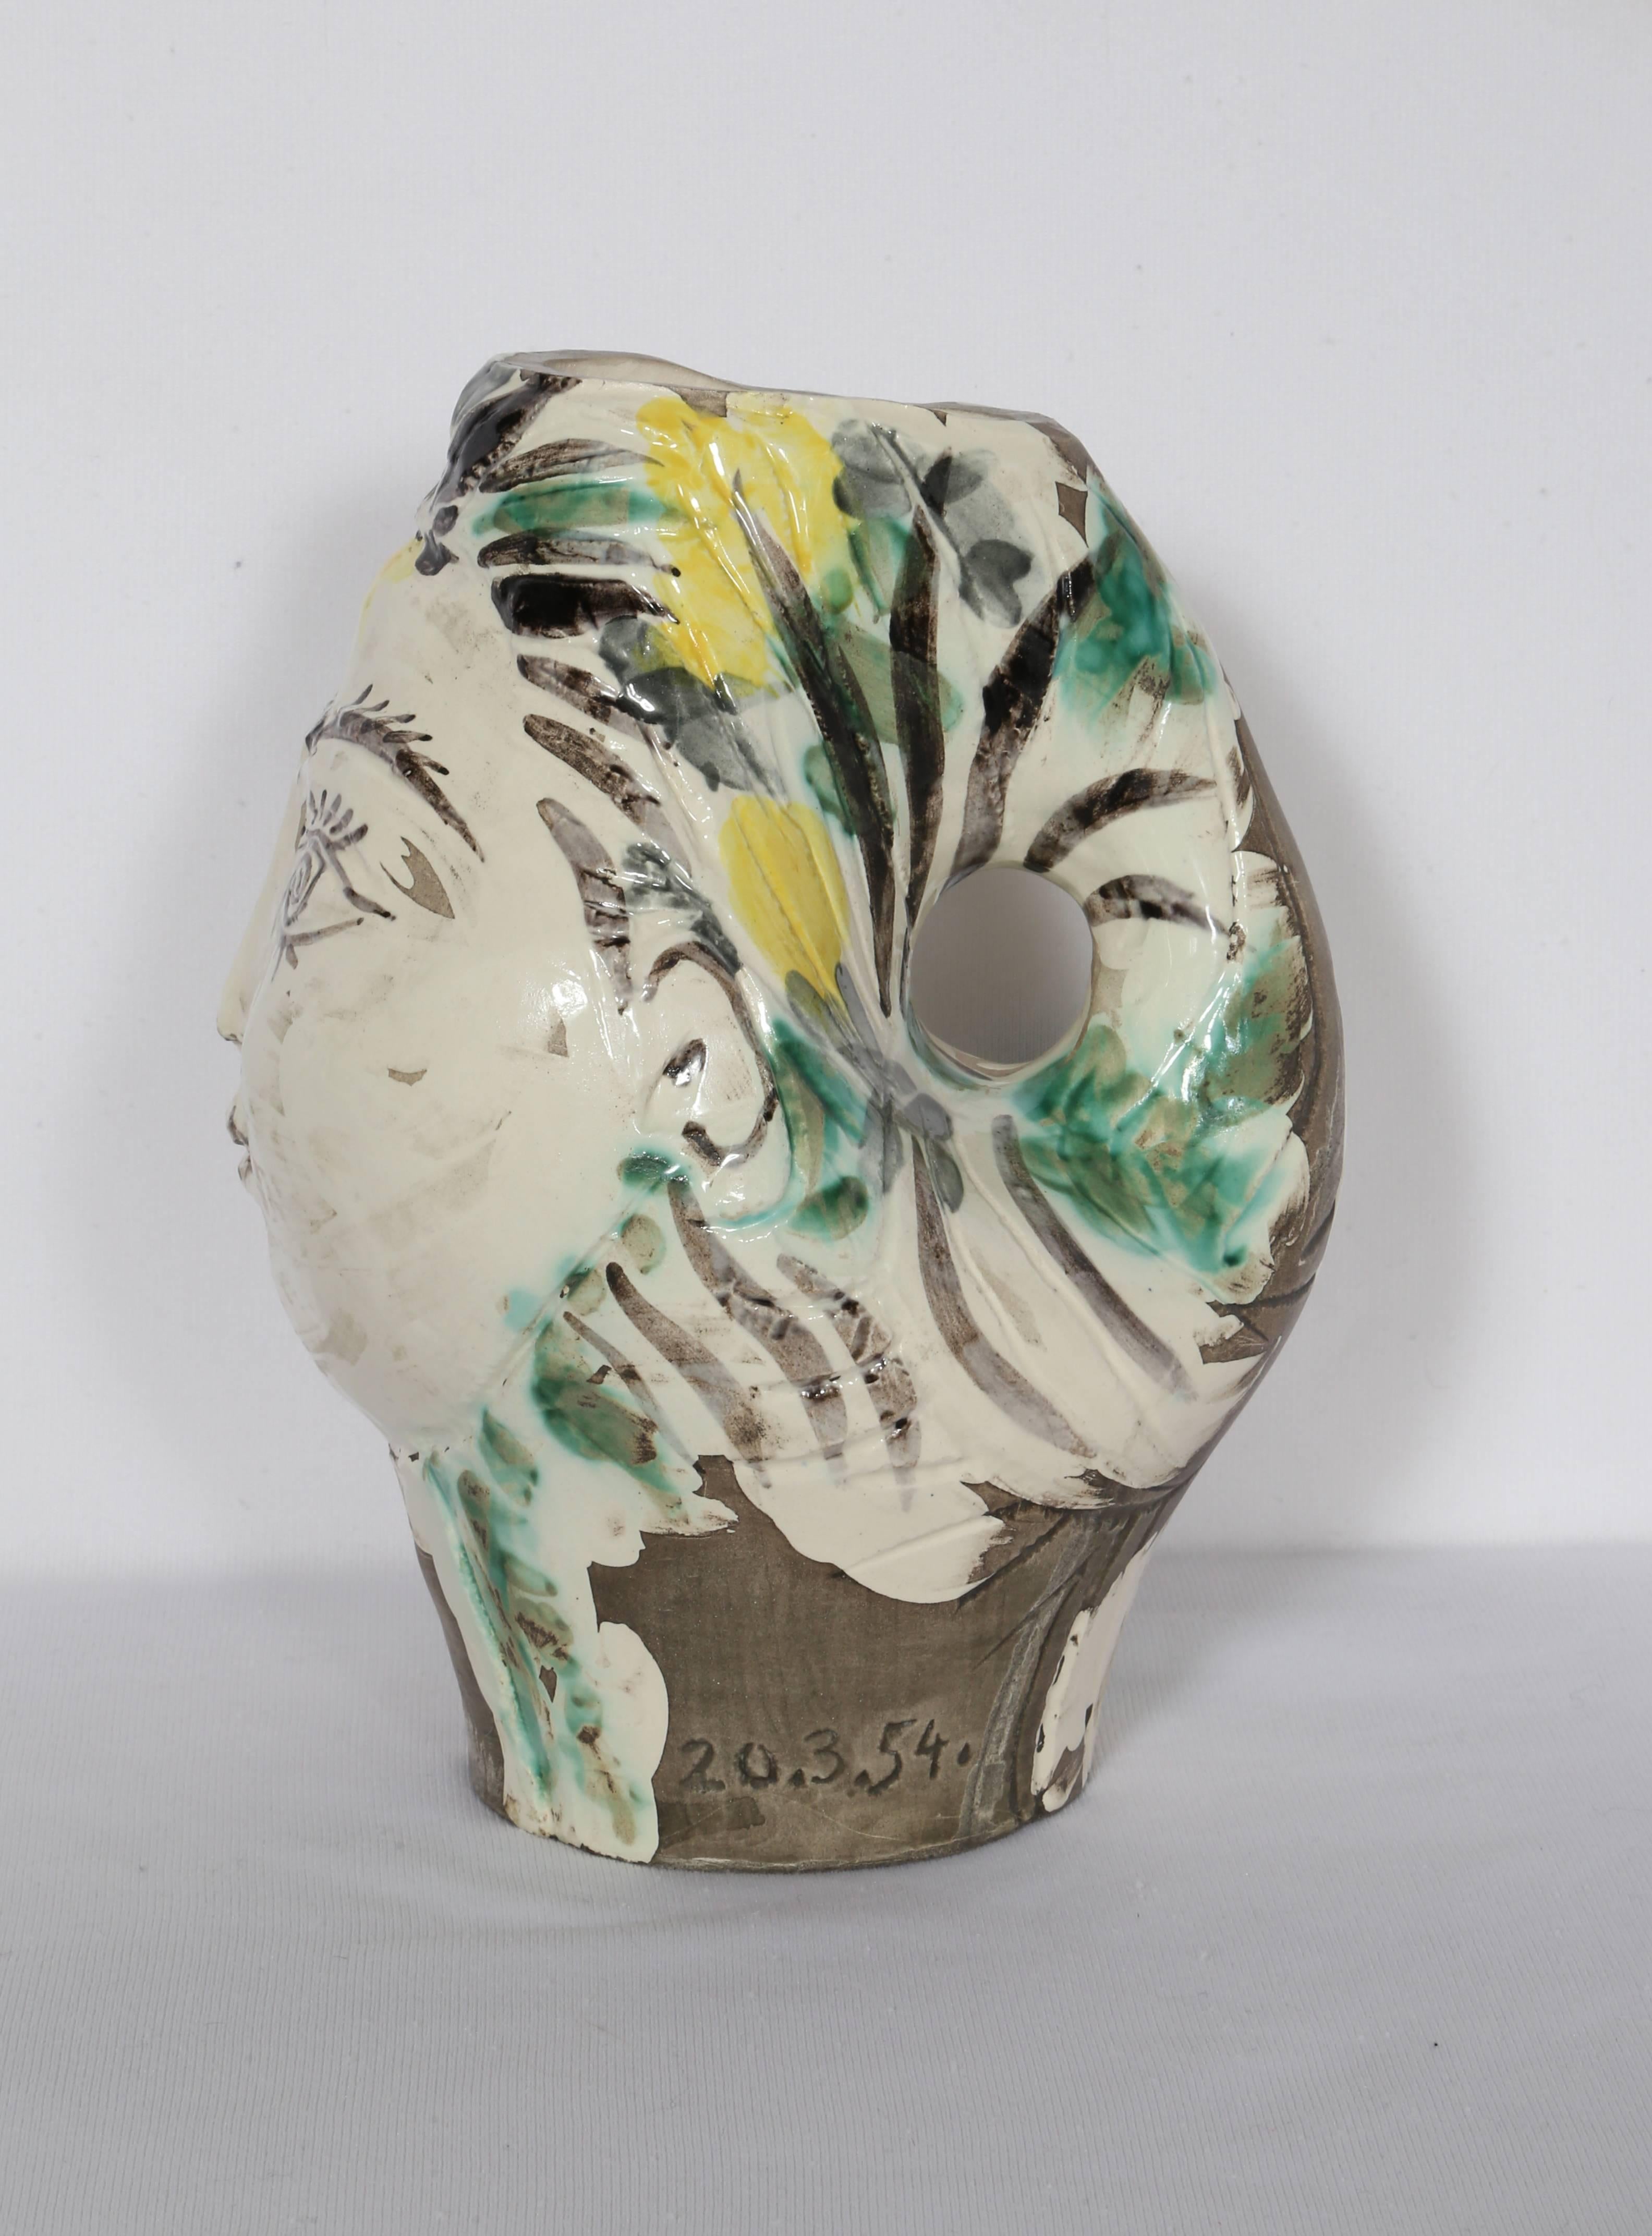 Woman's Head, Decorated with Flowers, Ceramic by Pablo Picasso 1954 For Sale 4